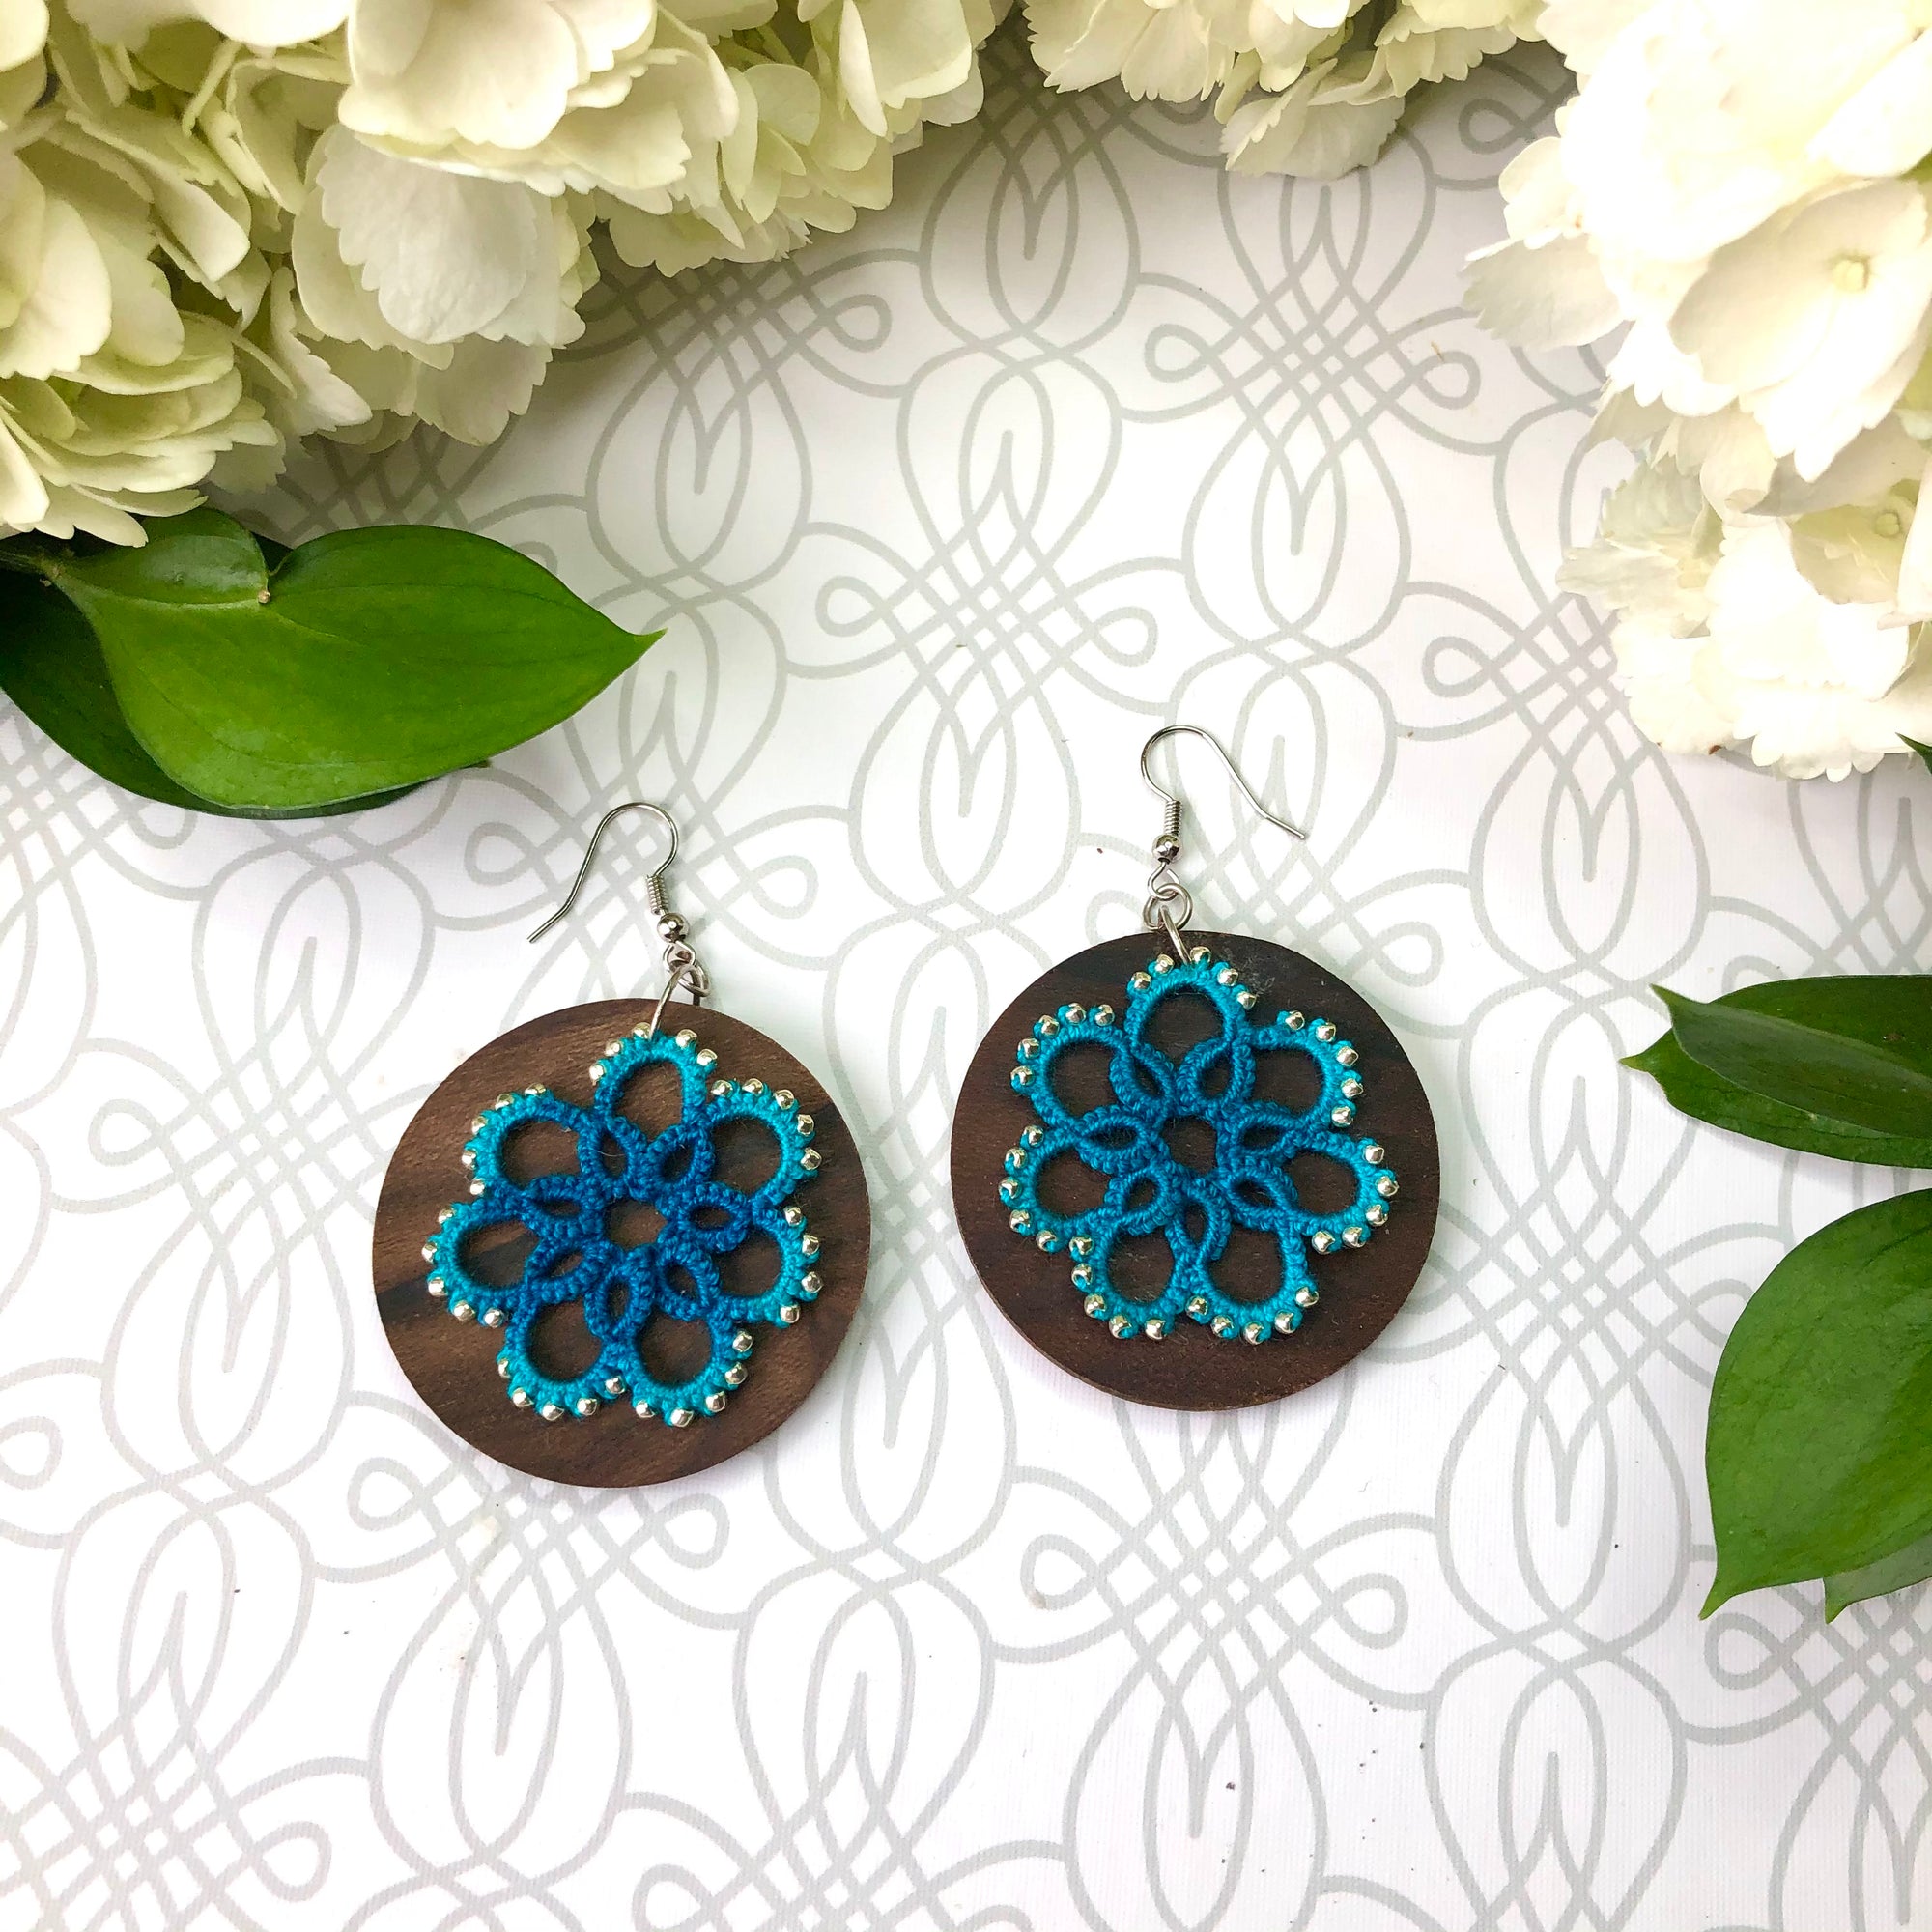 Tatted Lace Ombré Earrings over Ziricote Wood